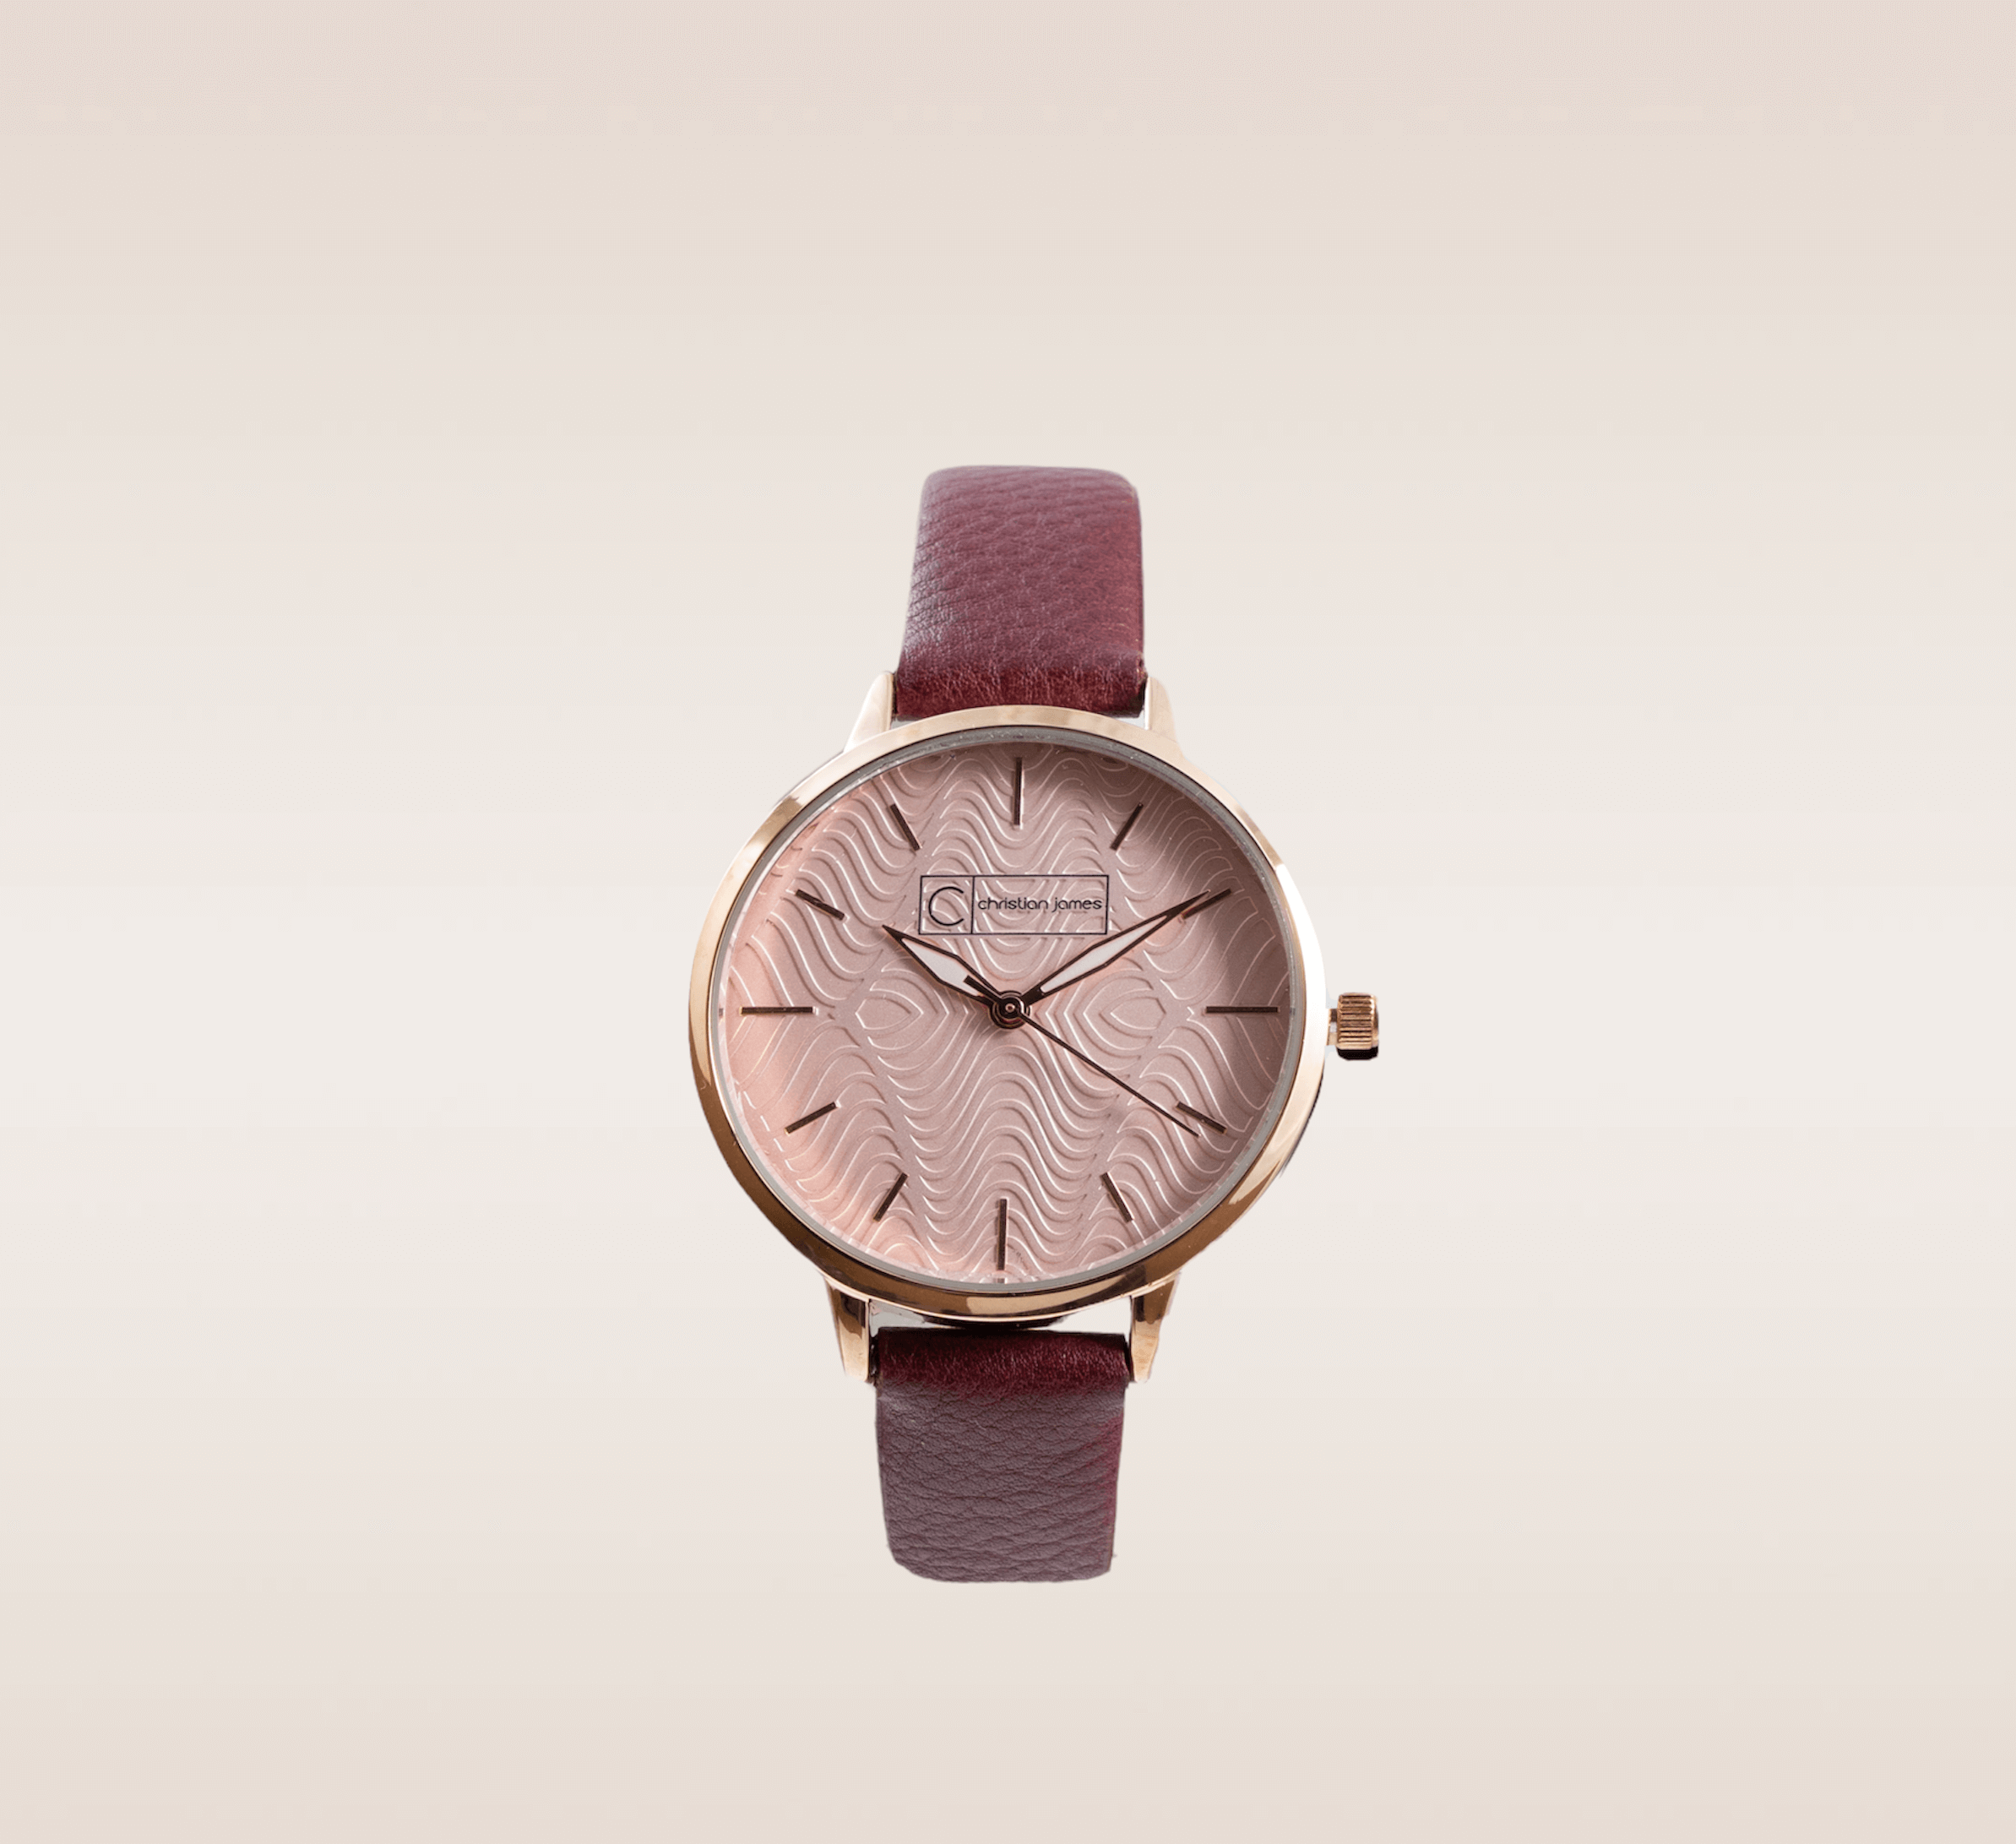 In this up-close shot, we are introduced to the captivating Burgundy Timepiece, a stunning accessory that exudes sophistication and timeless beauty. The watch features a luxurious gold casing that encases its exquisite design. The pink-textured face adds a touch of femininity and uniqueness, with its subtle patterns capturing the light and creating a mesmerizing effect. The watch hands, crafted in elegant gold and white, allows for easy and accurate timekeeping. Enhancing the overall allure, the watch is adorned with a rich burgundy band, exuding a sense of refined elegance.